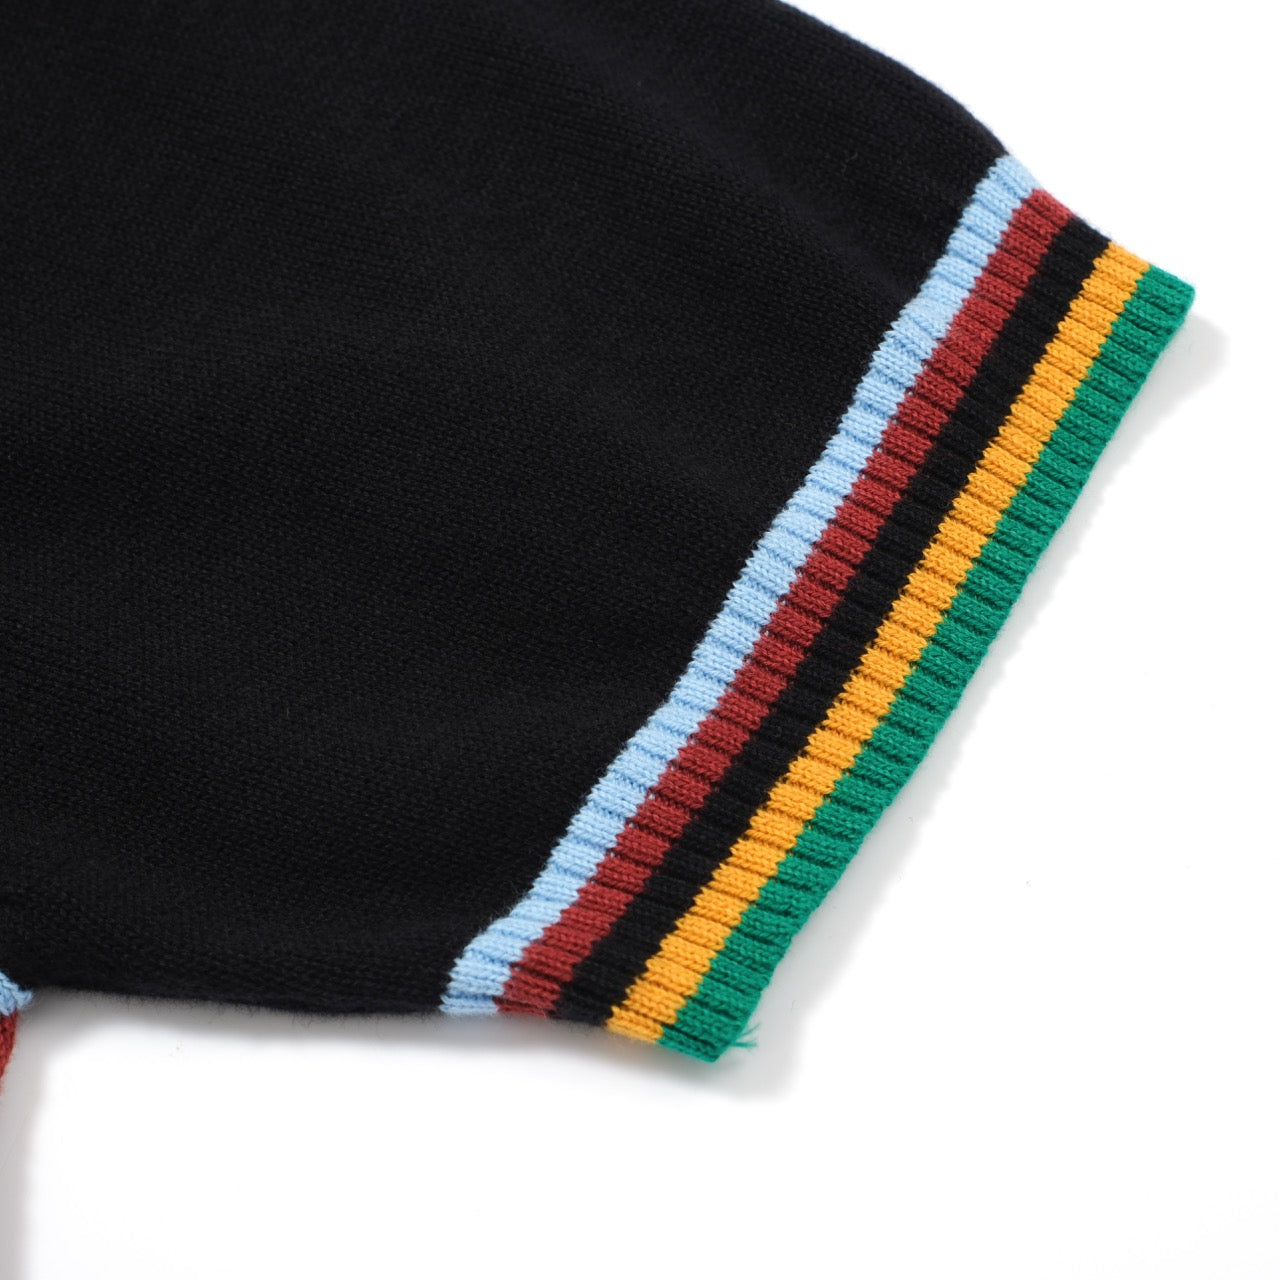 OXKNIT Men Vintage Clothing 1960s Mod Style Casual Rainbow Stripe Cycling Knitted Retro T-Shirts